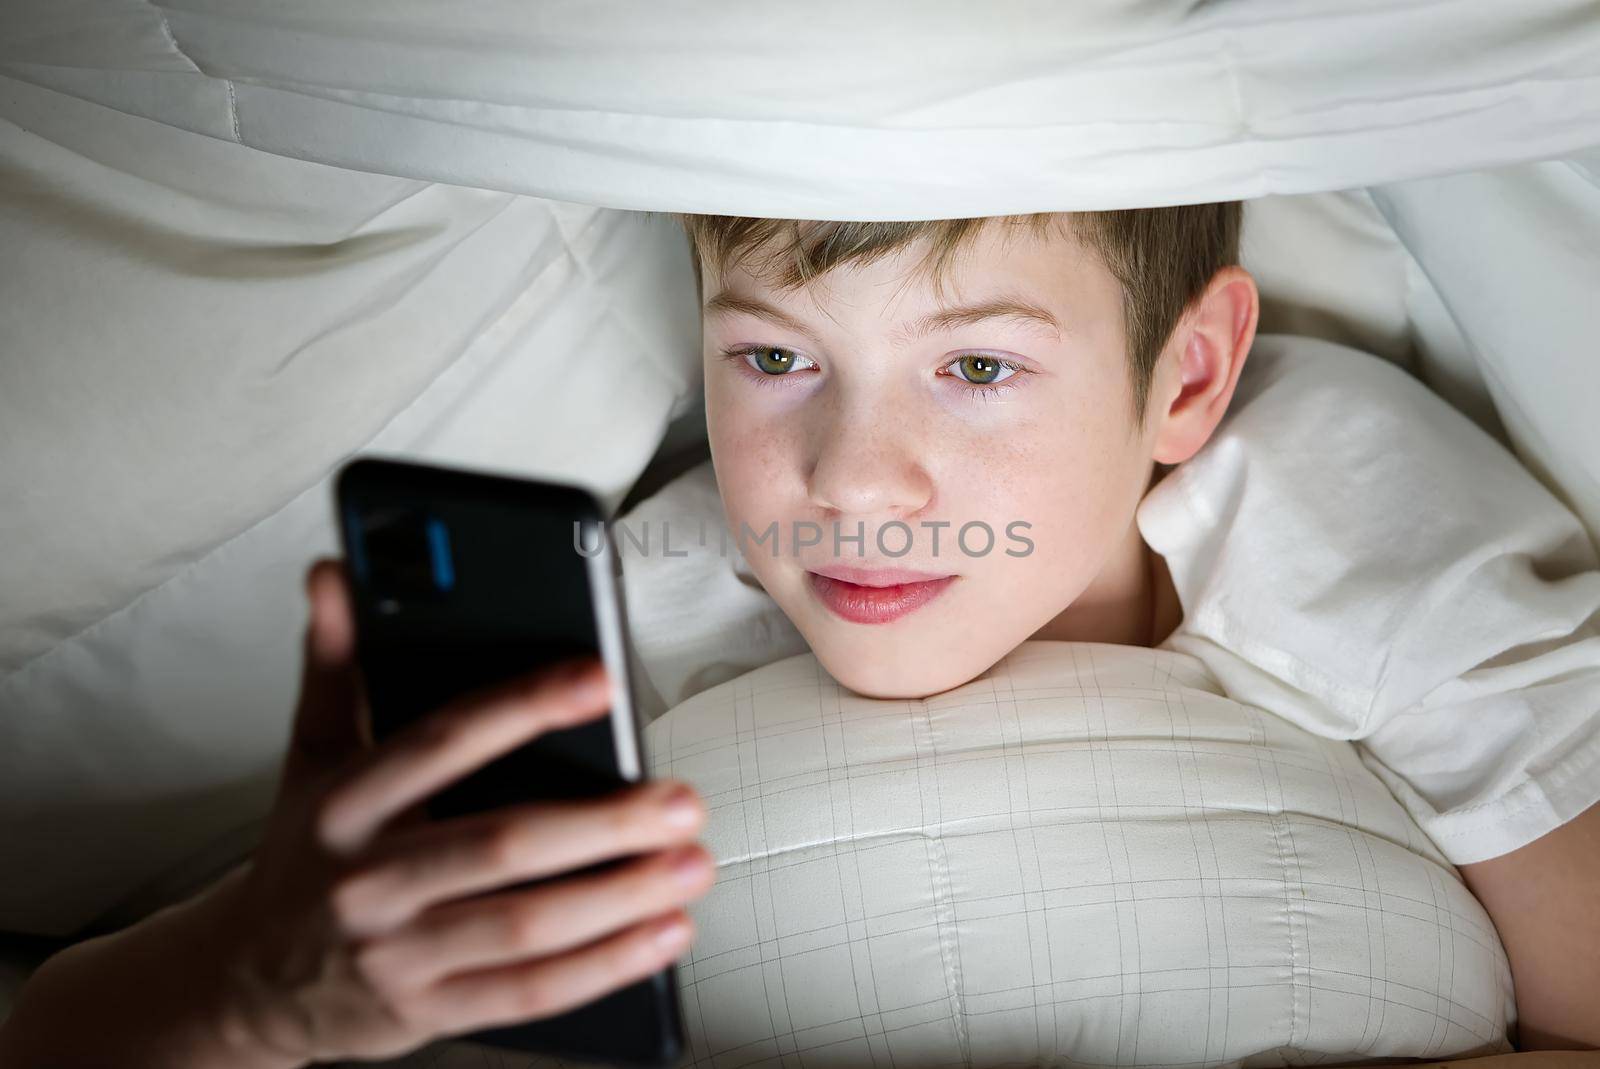 Boy under the blanket at night in his bed communicates on Internet. Child gadget addiction and insomnia. social media addiction by PhotoTime